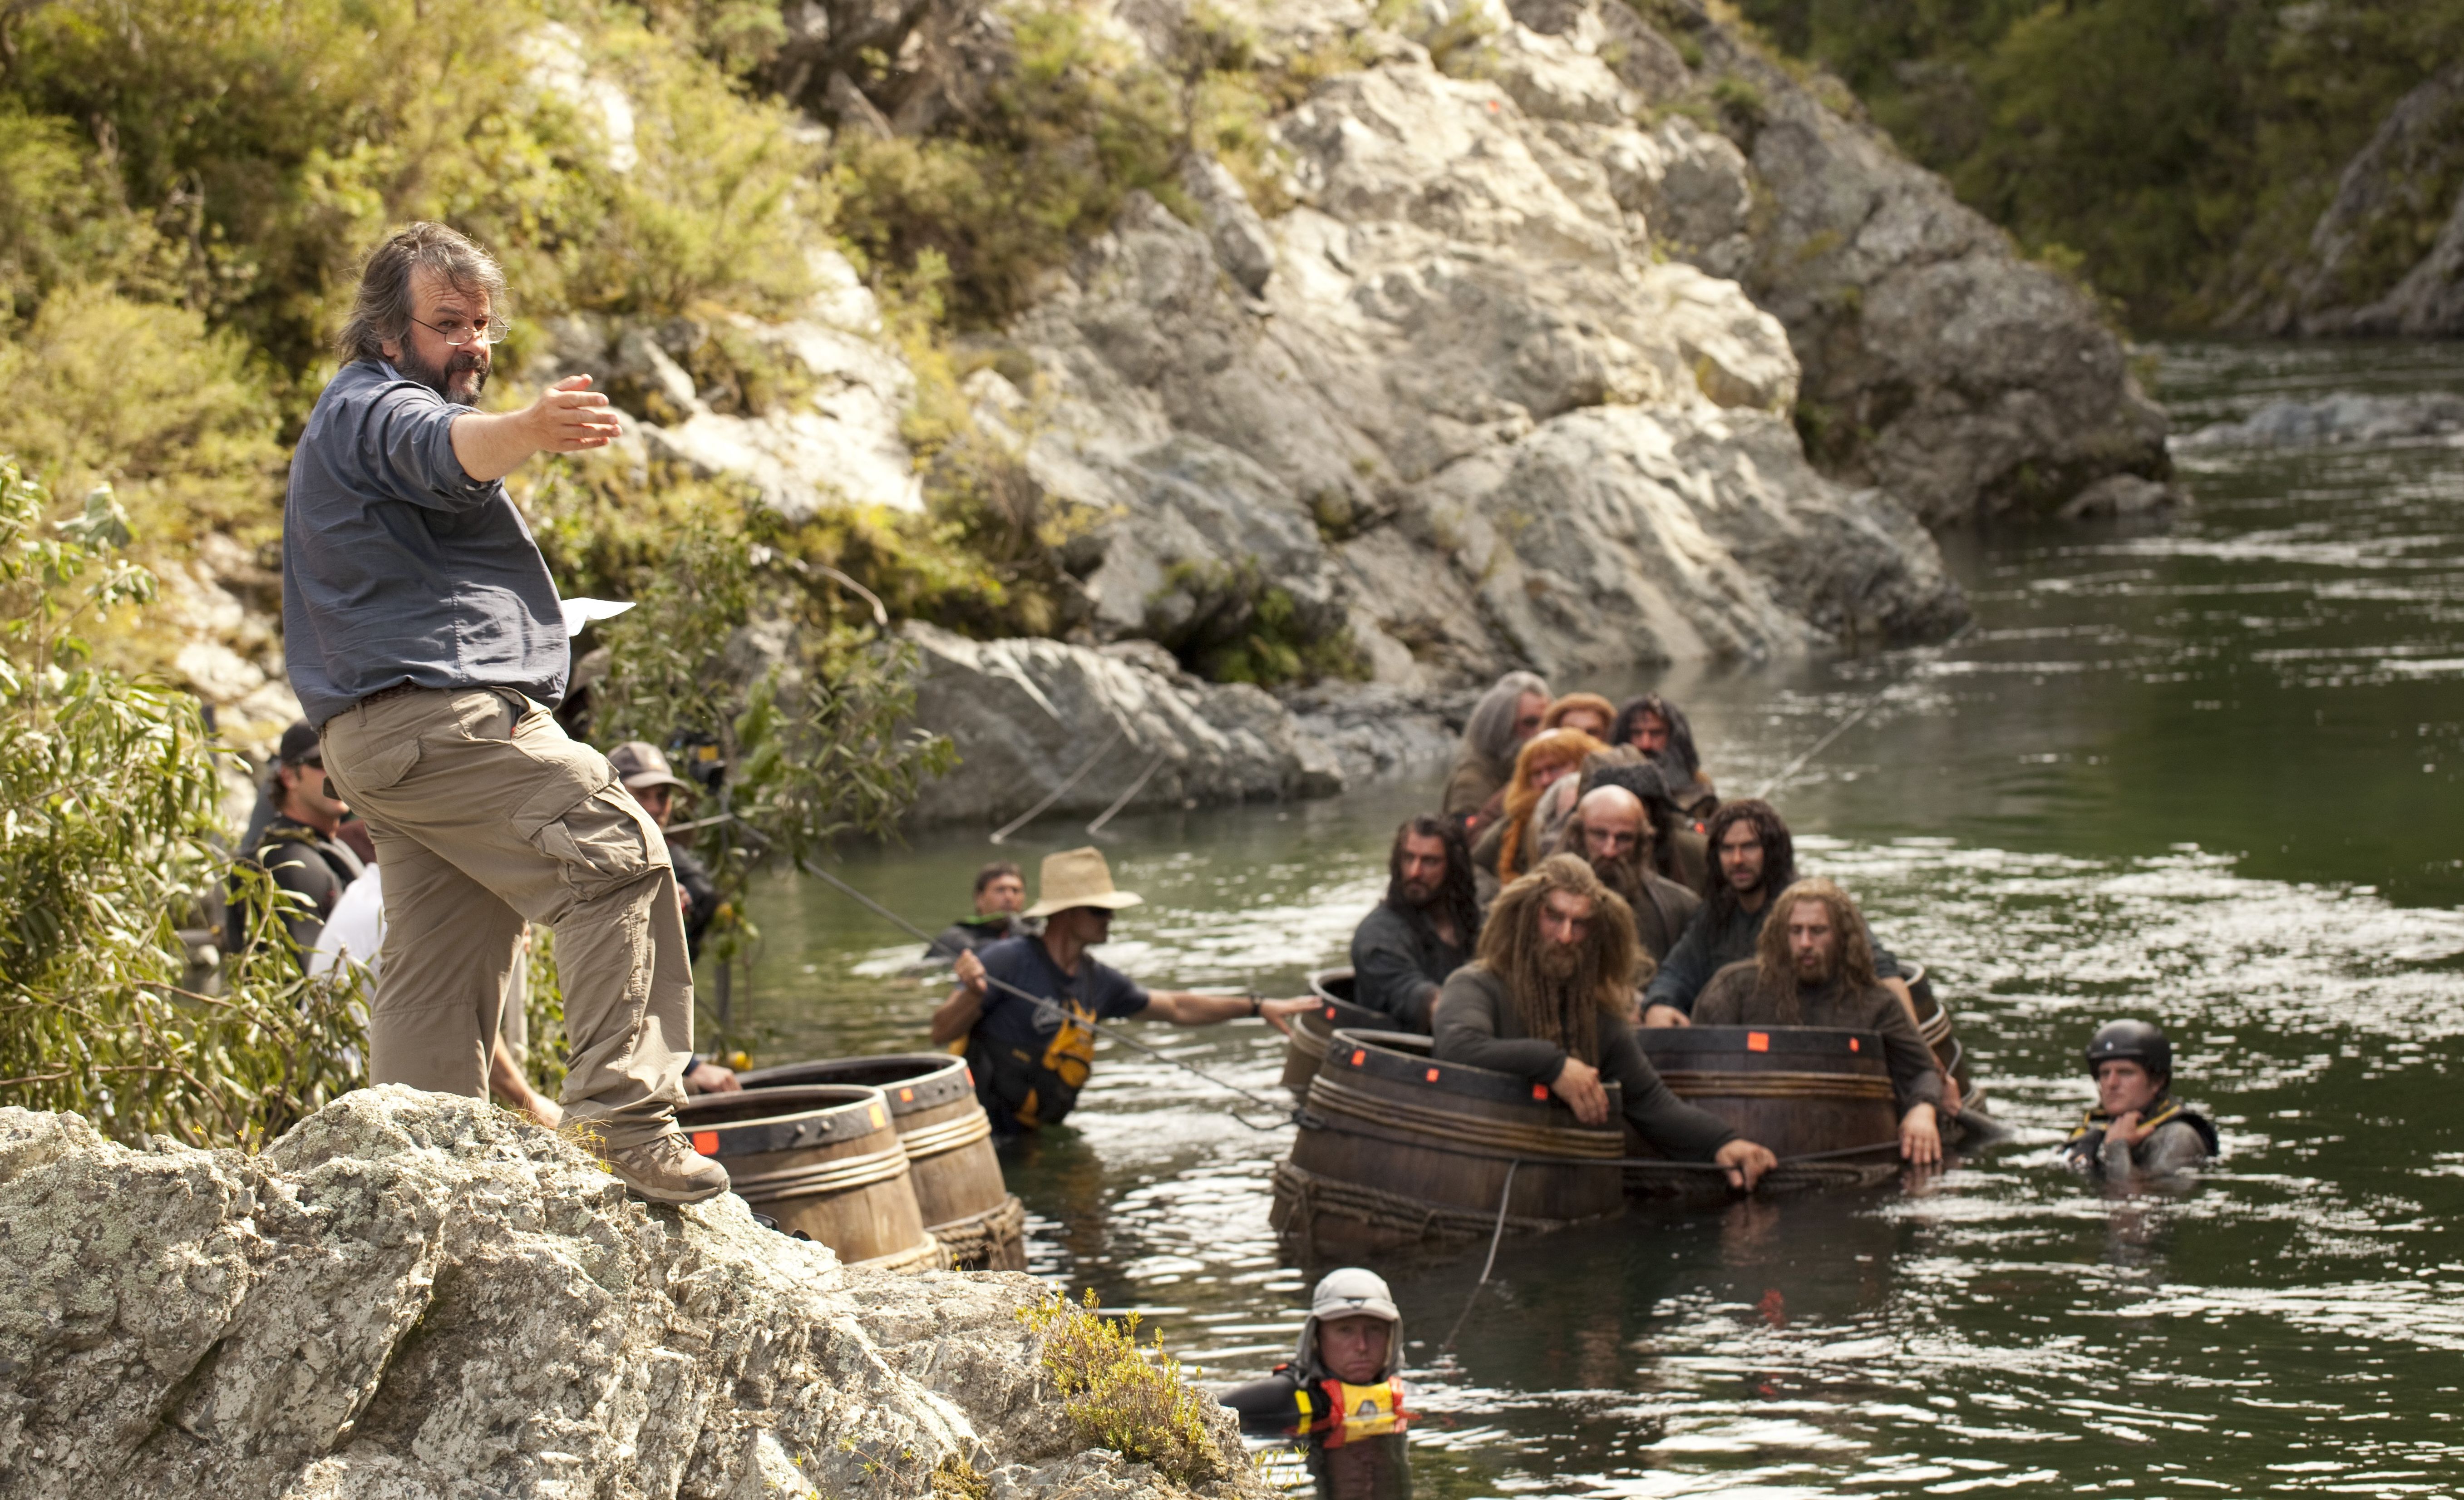 Peter Jackson directing the dwarfs in the river